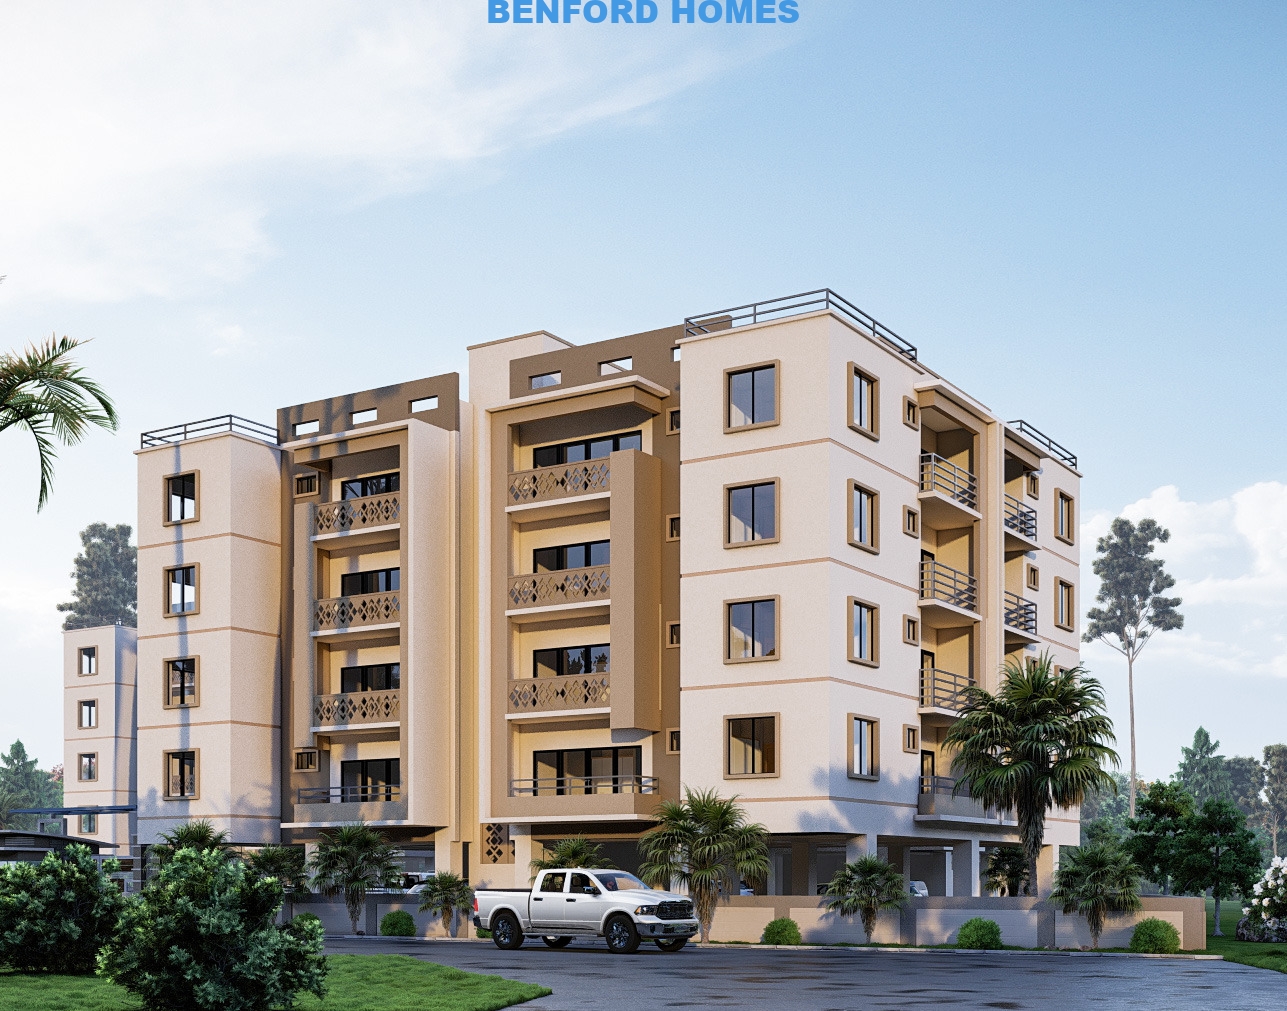 Studio Apartment off plan on Sale Nyali Near City Mall, second row from the beach on Sale | Benford Homes properties on sale